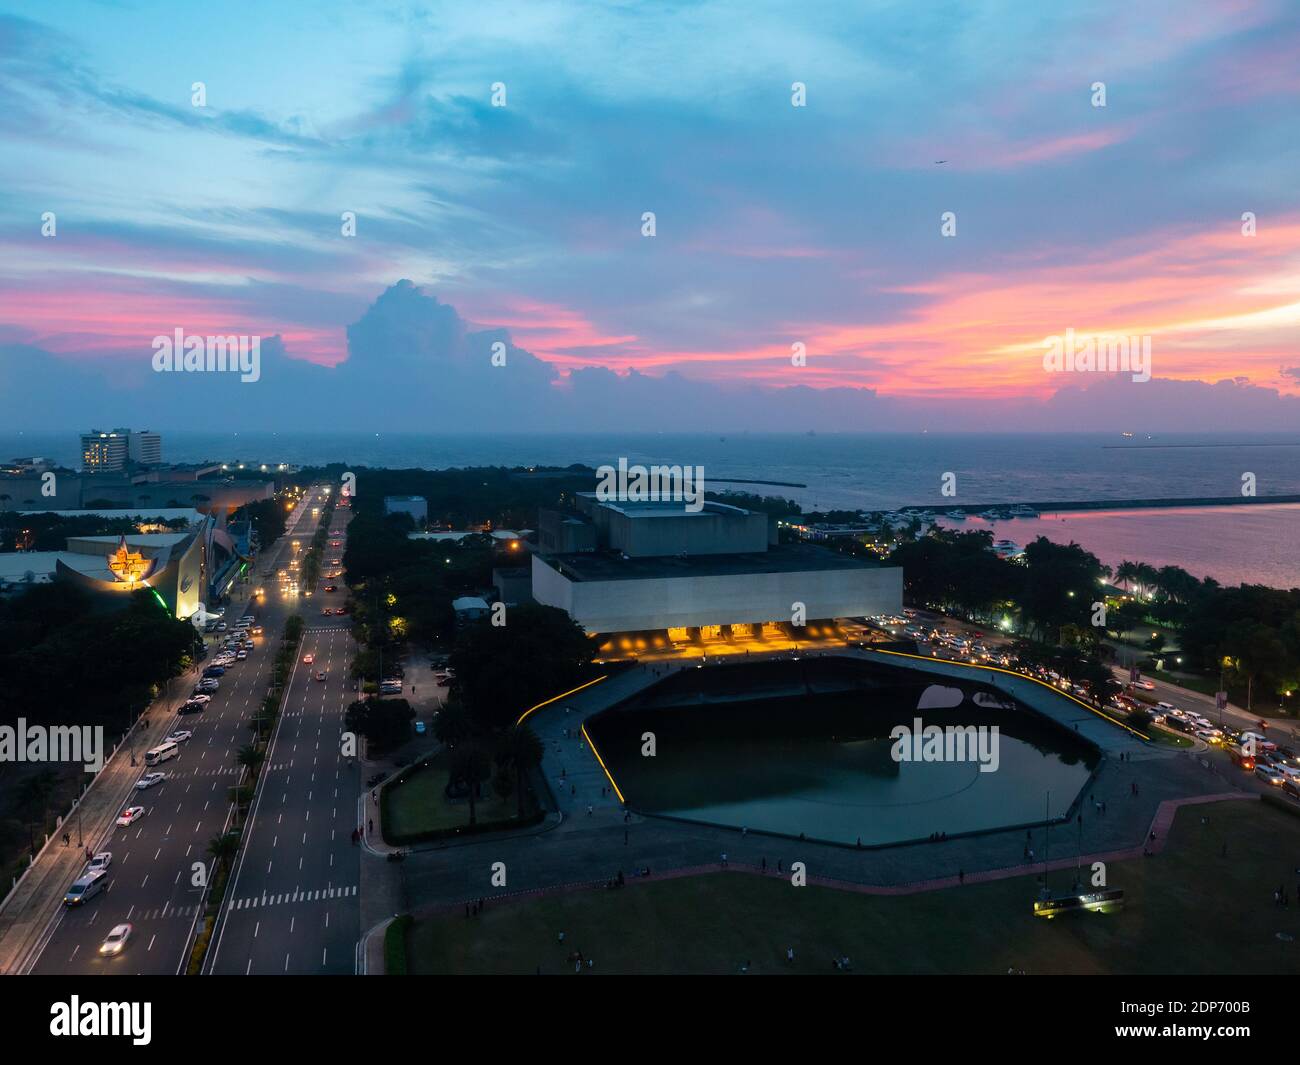 Tanghalang Pambansa, the National Theater, a part of the Cultural Center of the Philippines, at sunset with Manila Bay in the background. The theatre Stock Photo